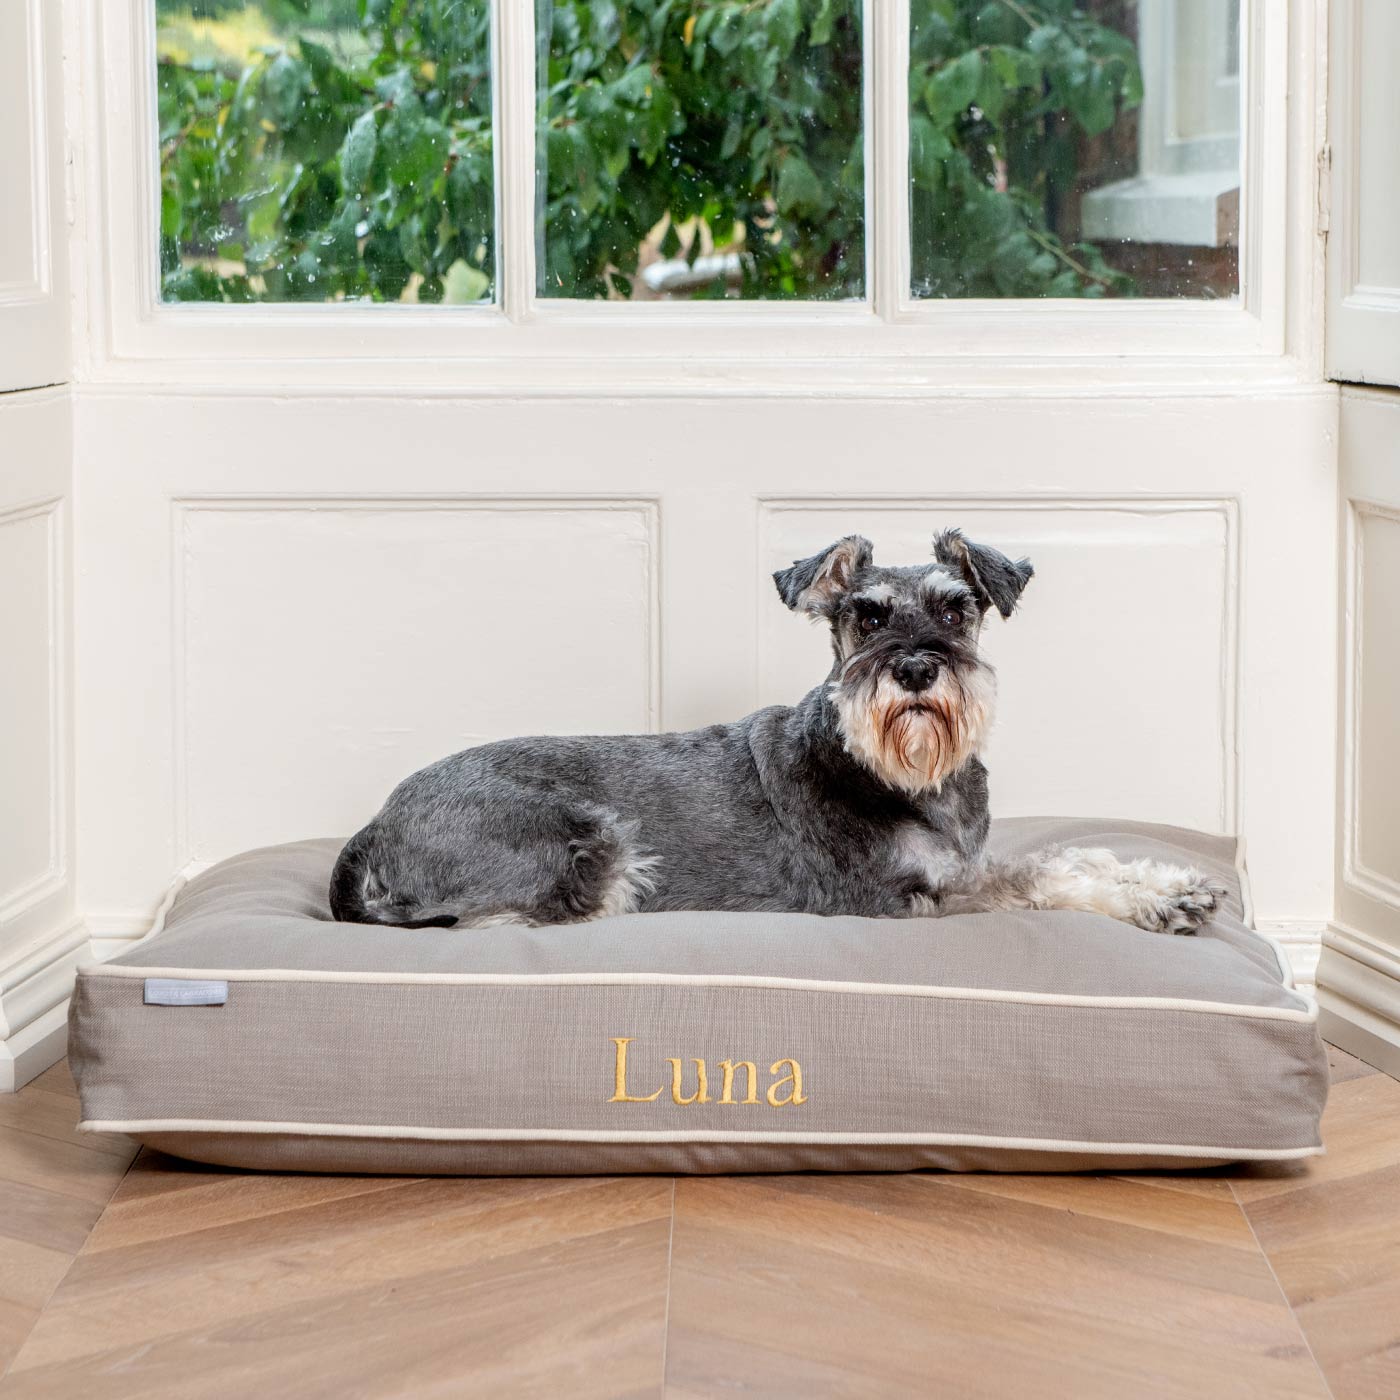 Luxury Dog Cage Cushion, Savanna Stone, part of the savanna collection. The Perfect Dog Crate Accessory, Available To Personalize Now at Lords & Labradors US